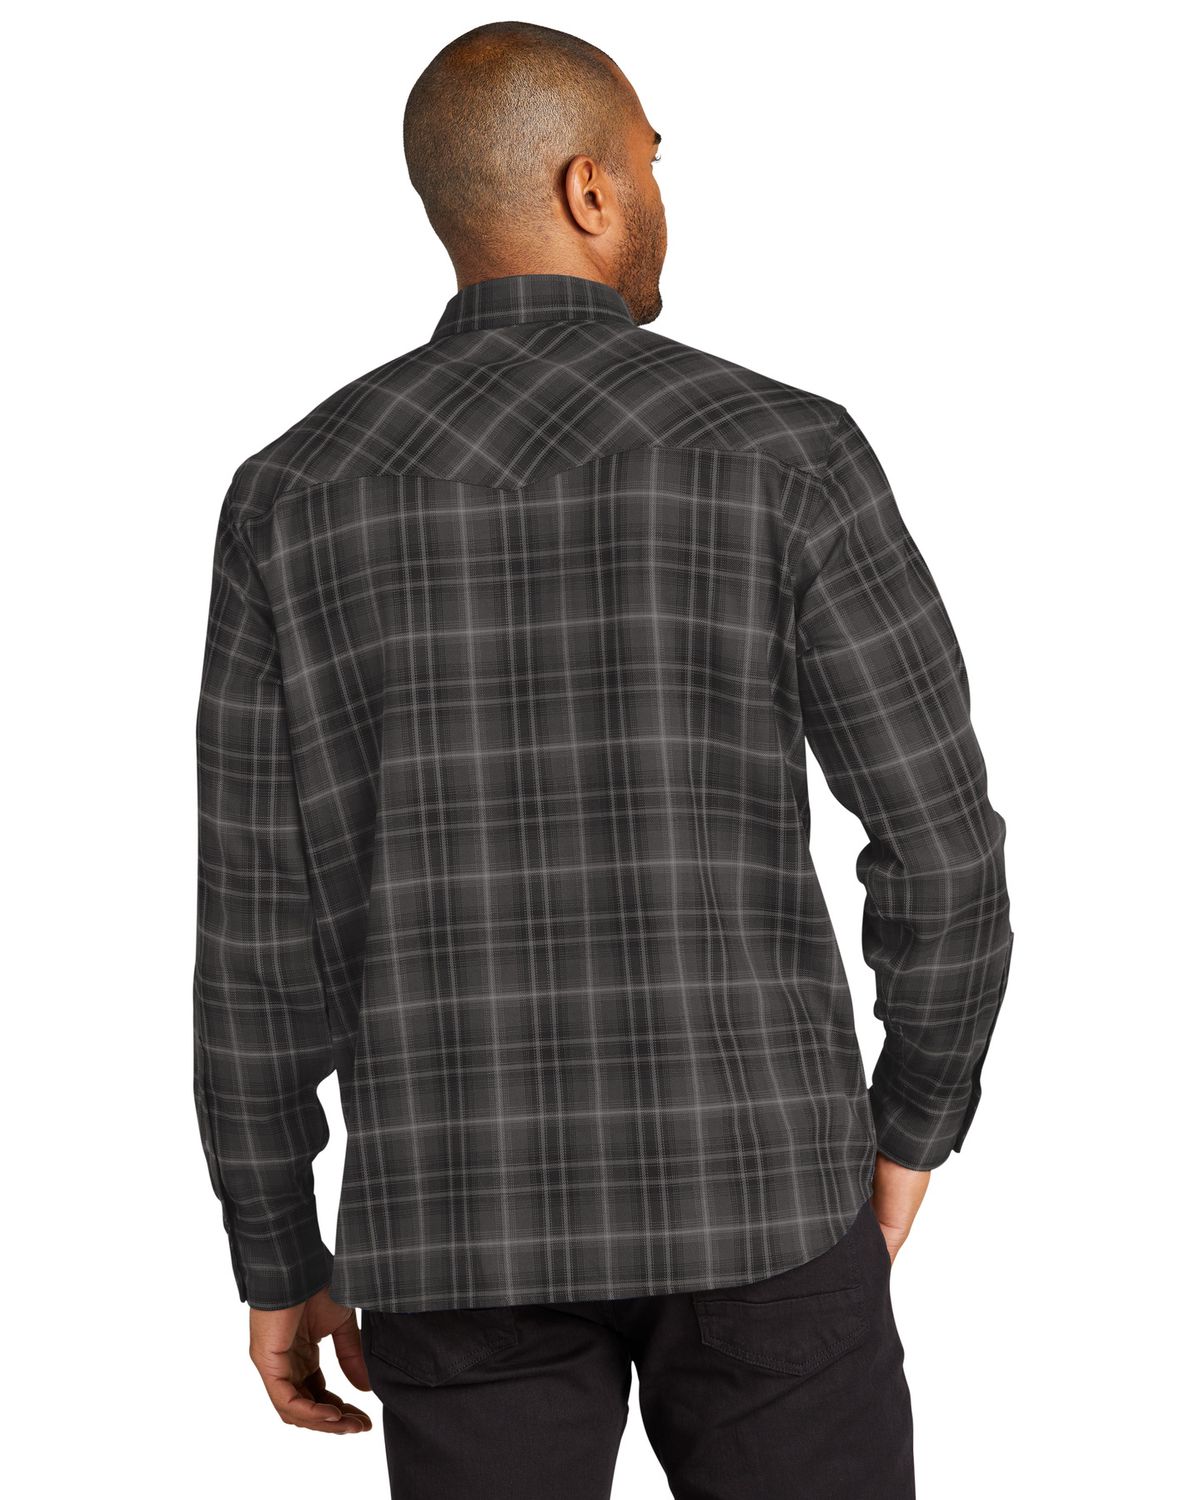 'Port Authority W672 Long Sleeve Ombre Plaid Shirt'